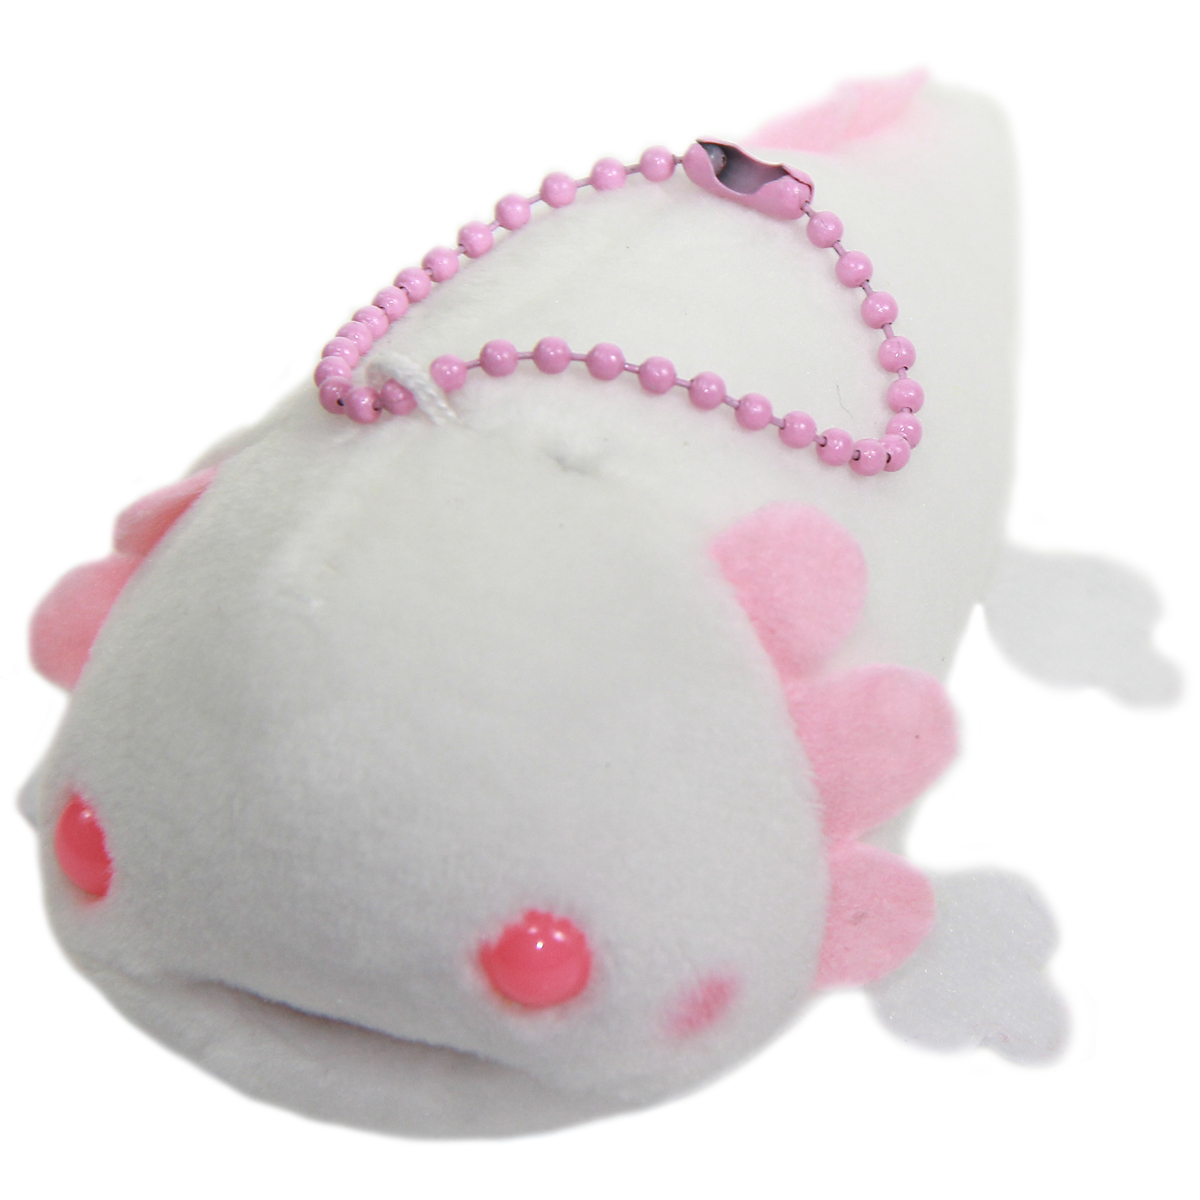 Kawaii Axolotl Plushie Small Keychain Collection Super Soft Plush Toy White 4 Inches